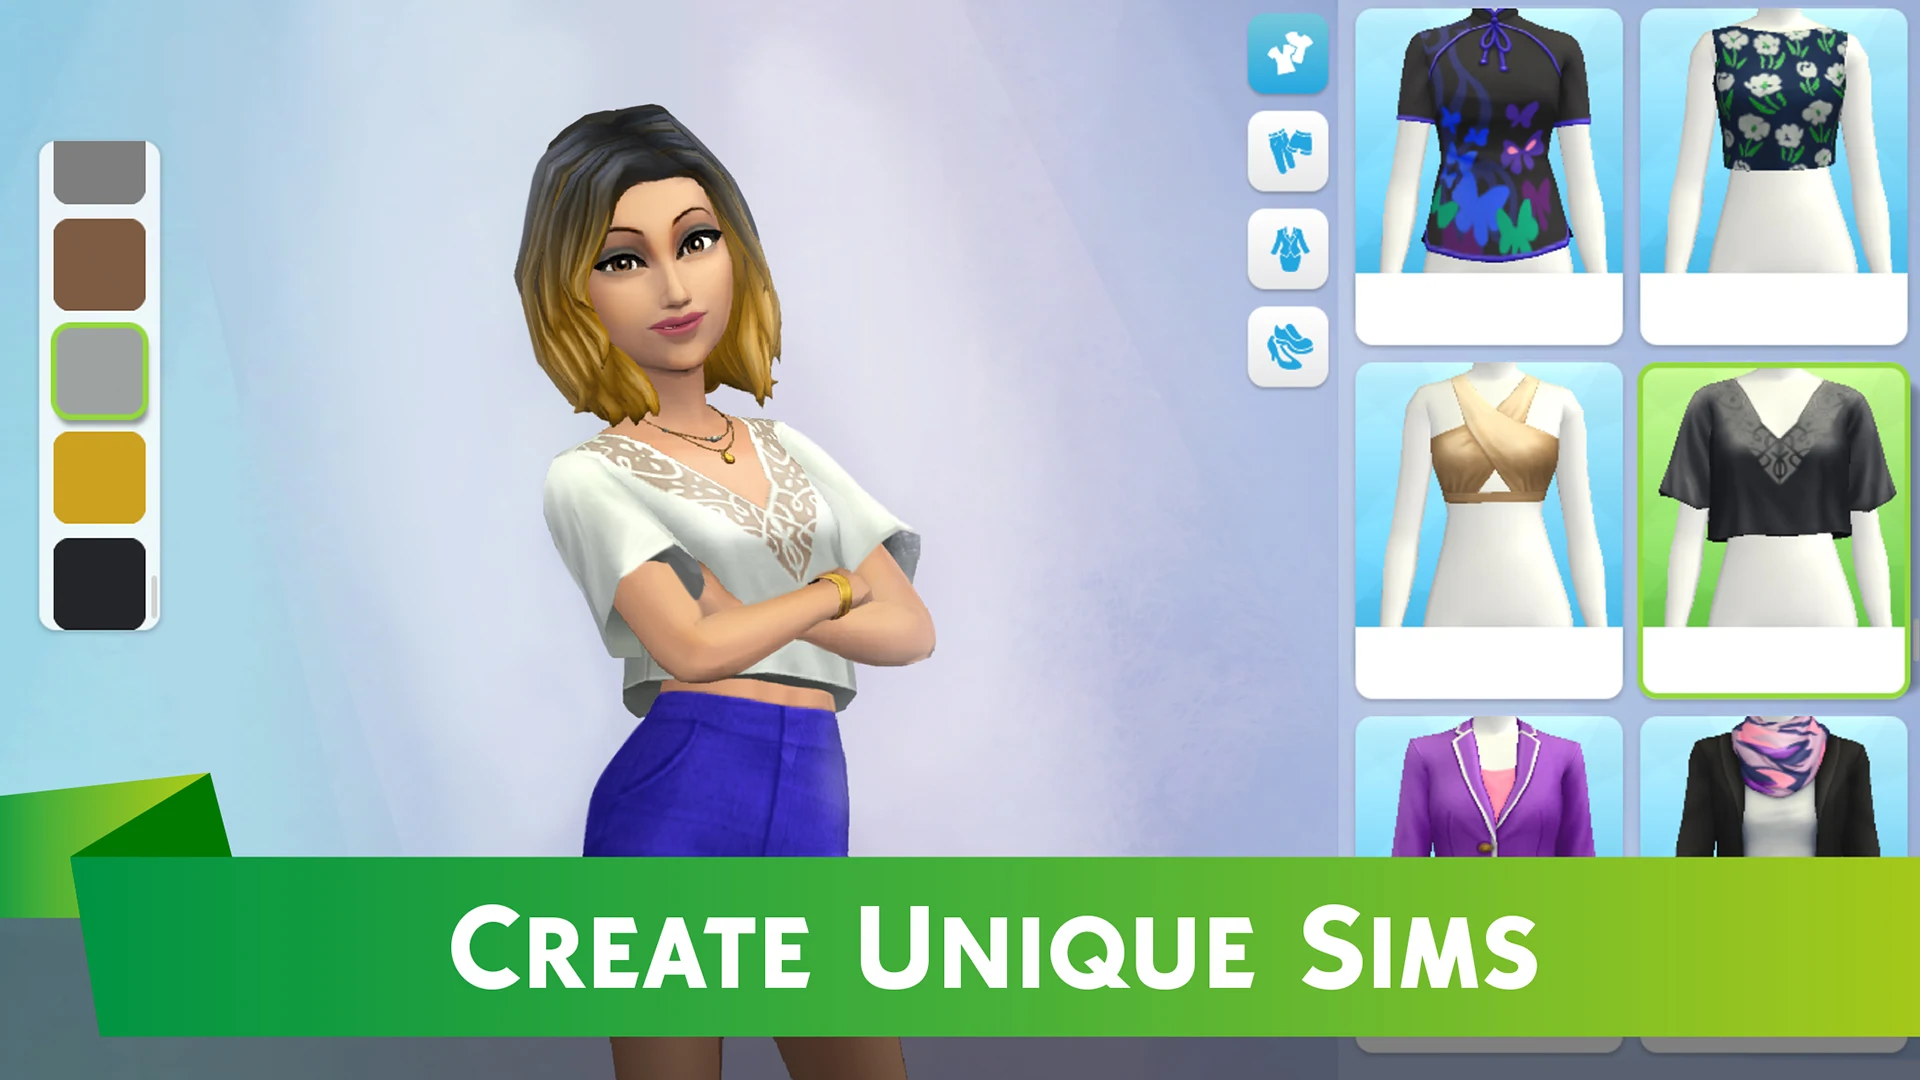 The Sims Mobile MOD APK free games